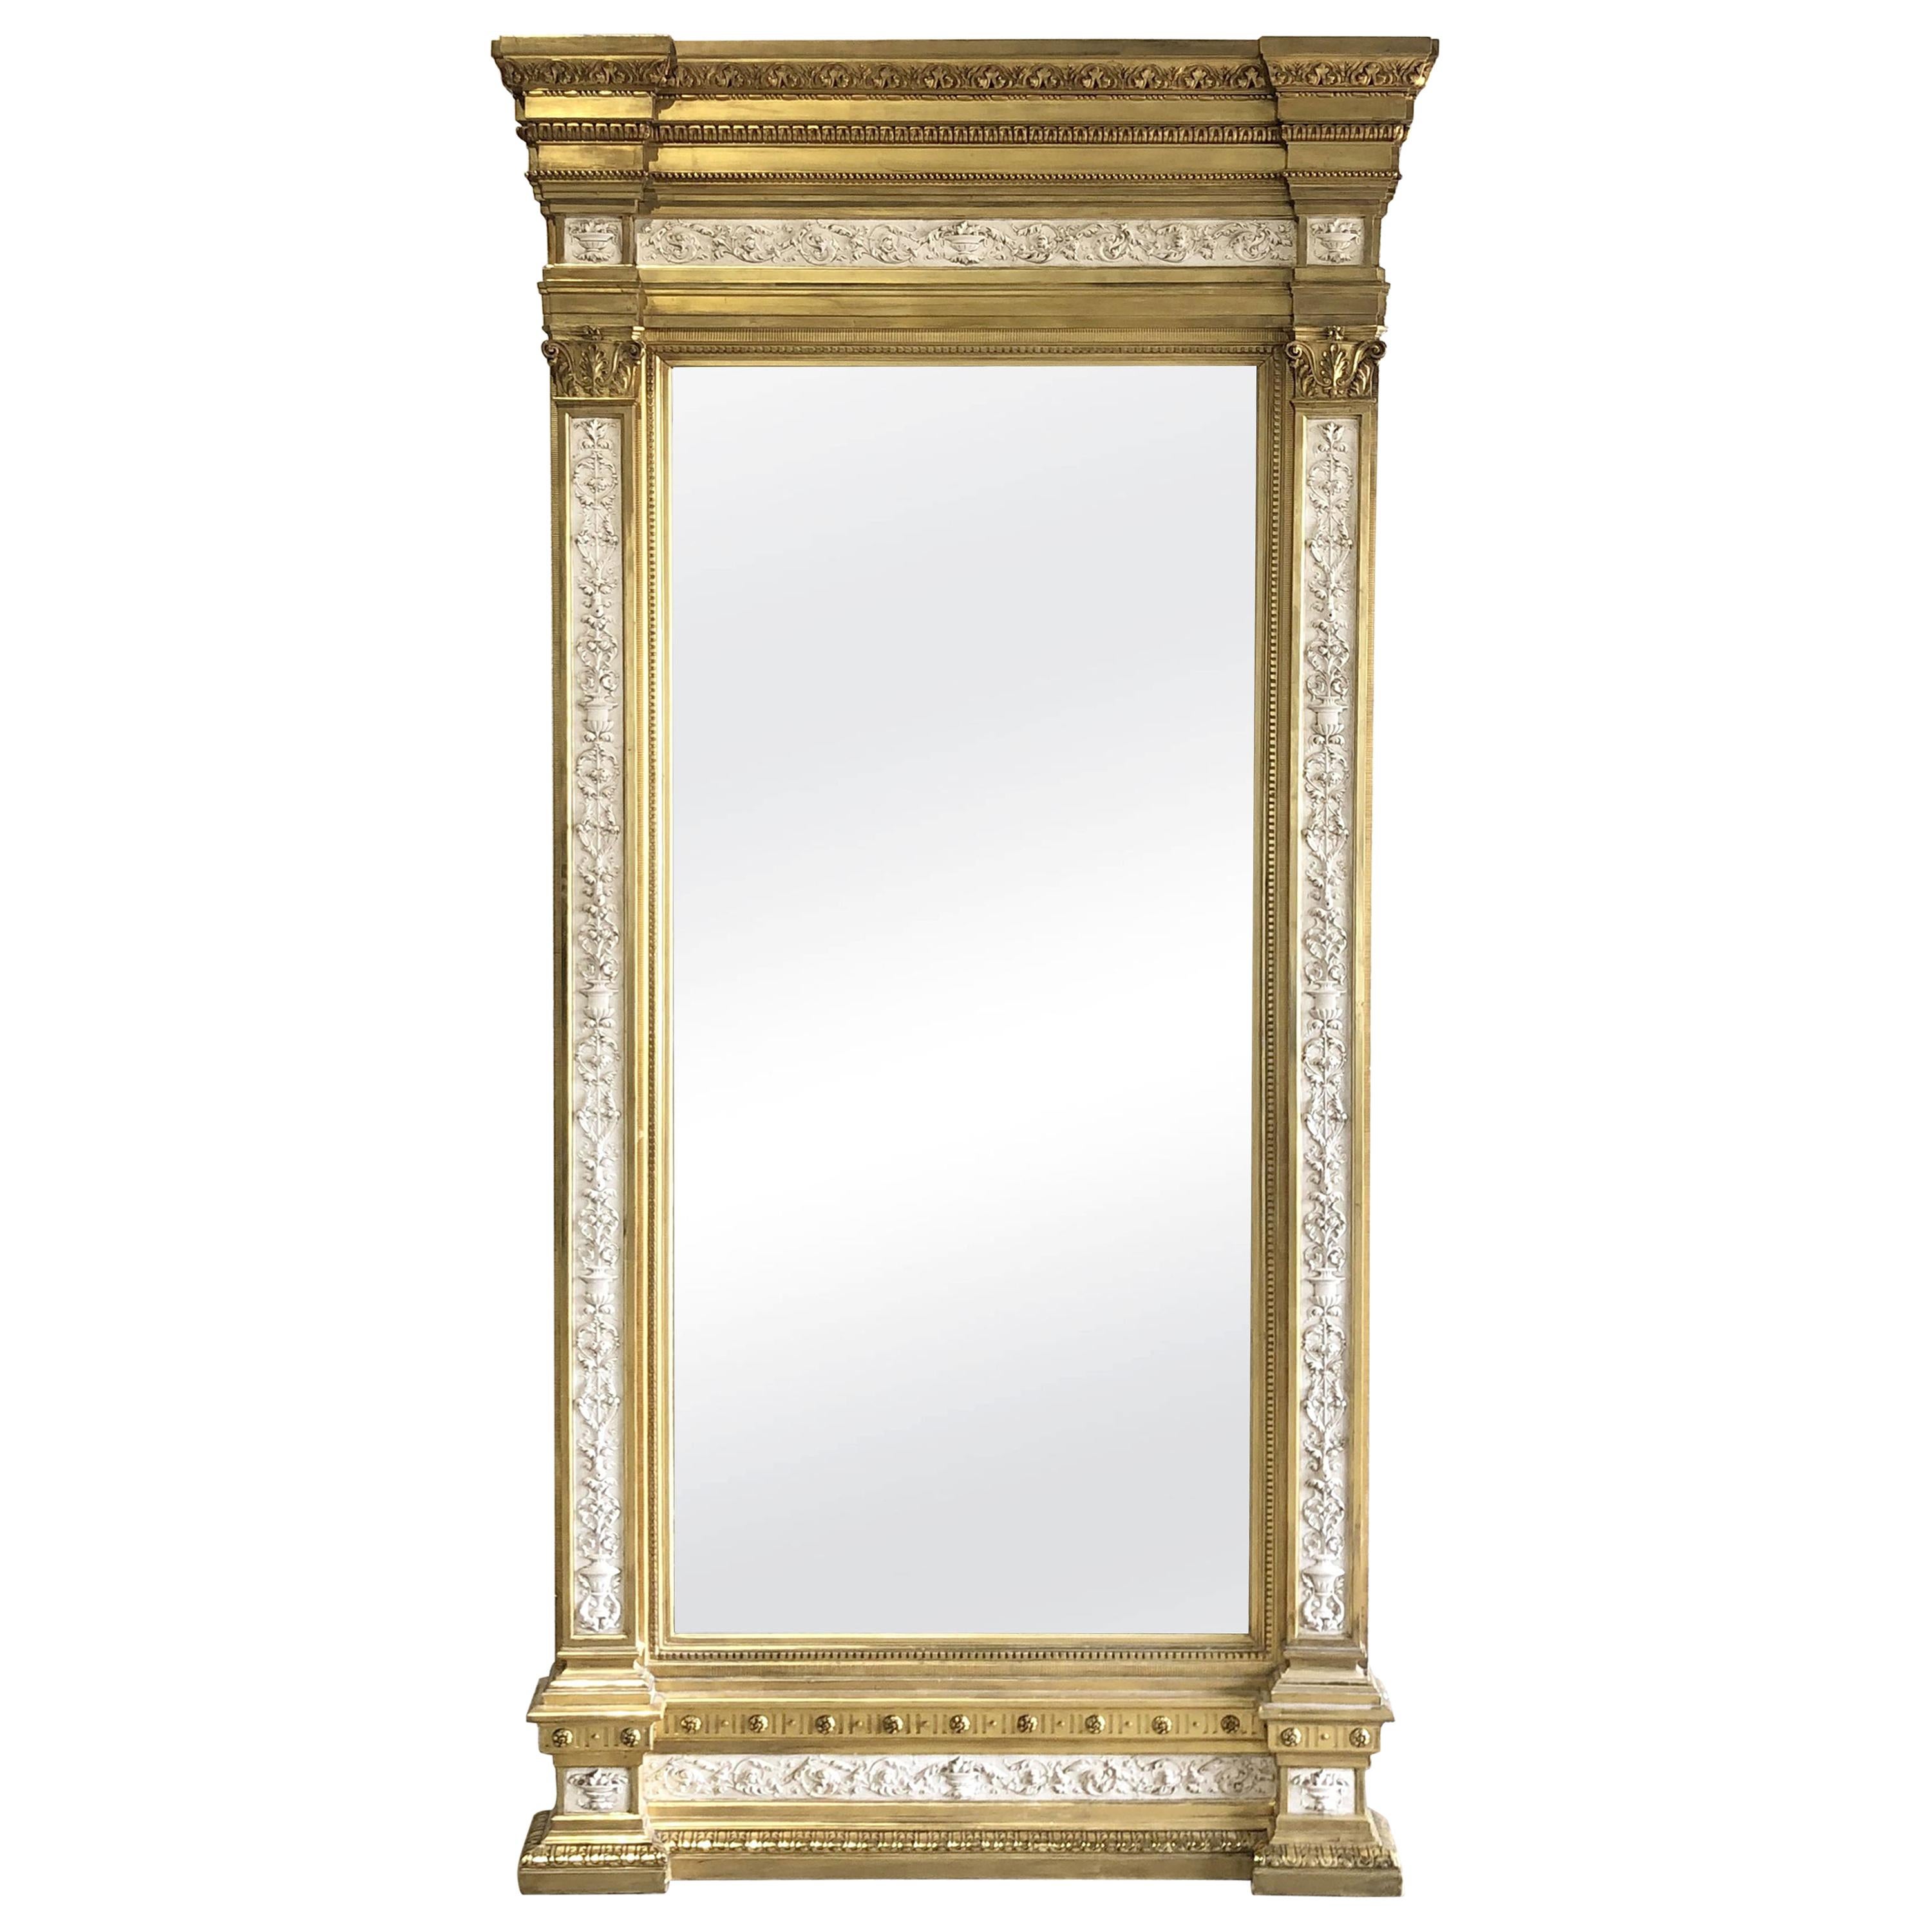 Swedish Neoclassic Monumental Cream Painted and Parcel-Gilt Pier Mirror